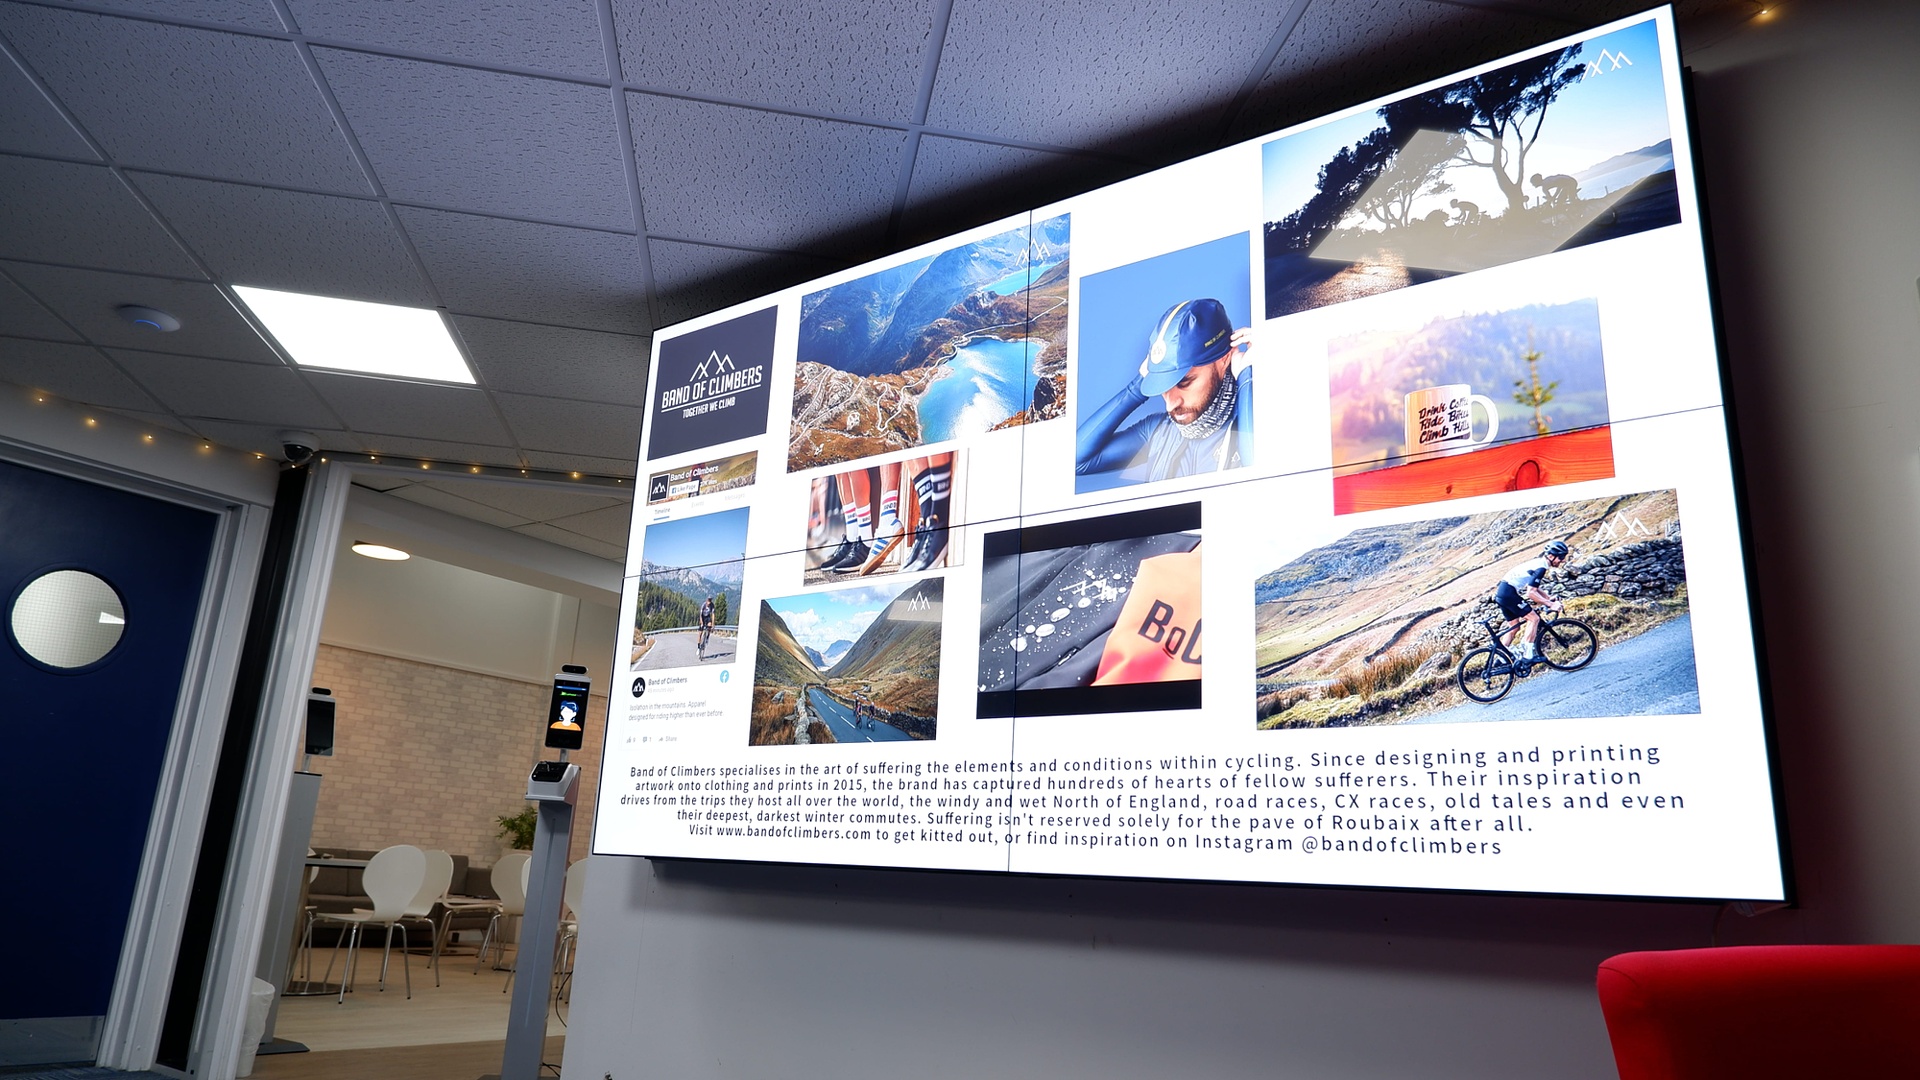 LED vs. LCD: The Video Wall Battle